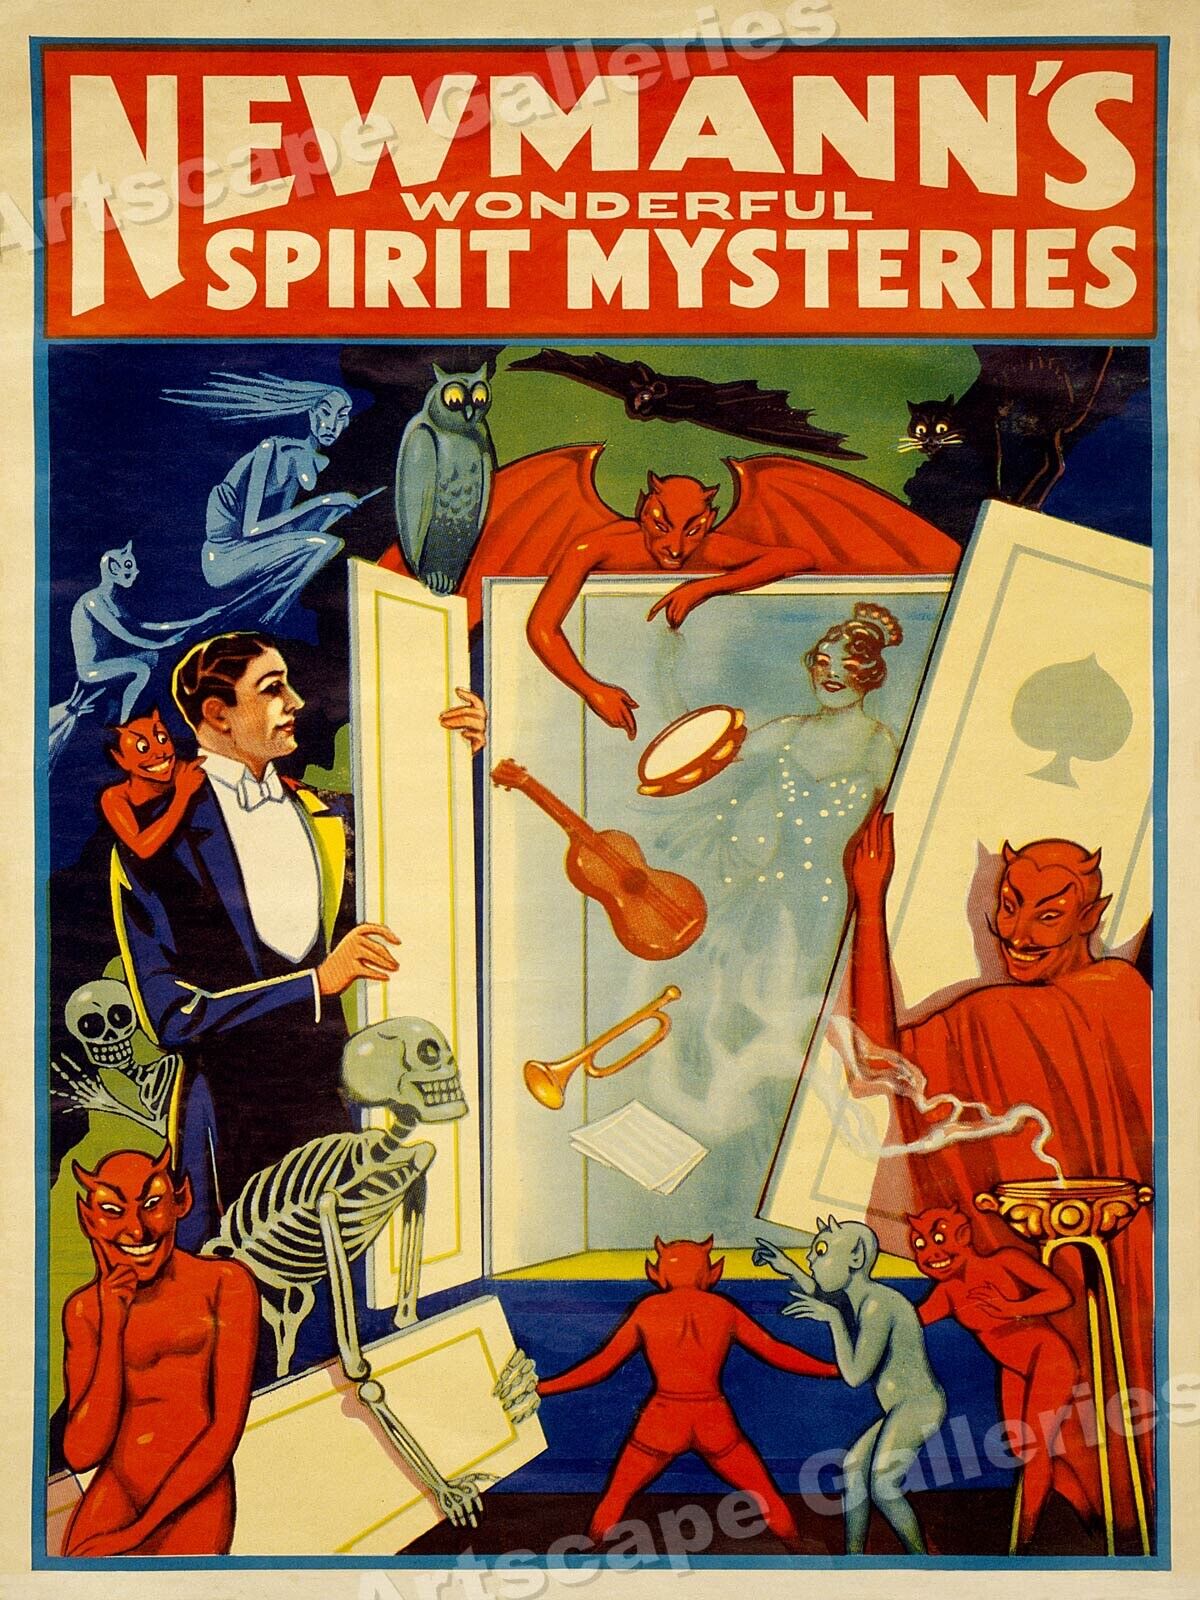 1911 Newmann's Mysteries Vintage Style Magic Magicians Poster - 18x24